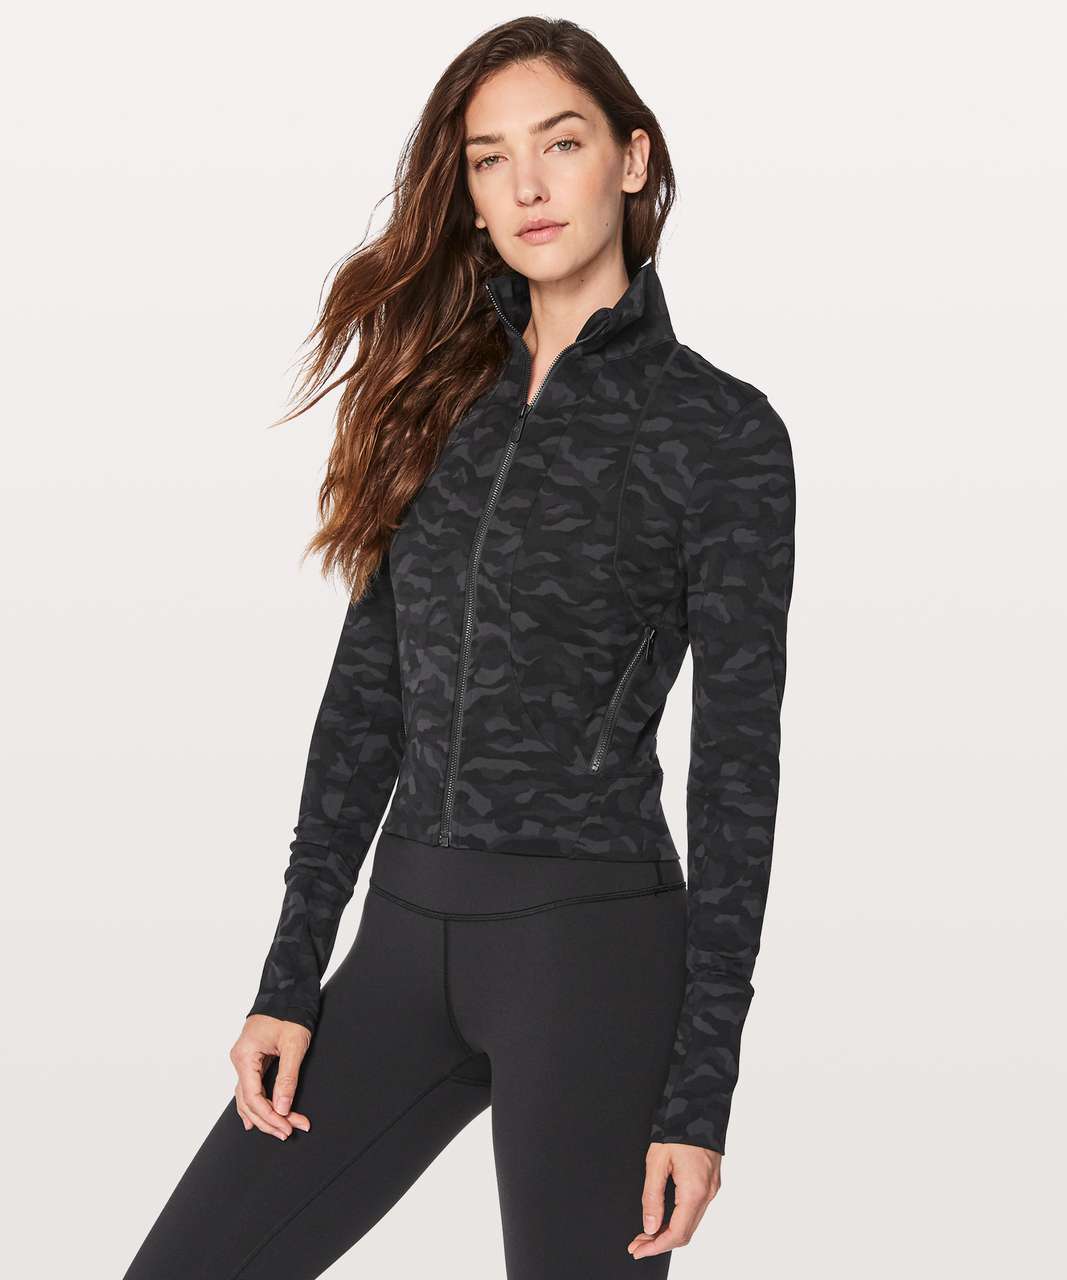 Lululemon dark fuel zone in crops coast camo fluffin awesome